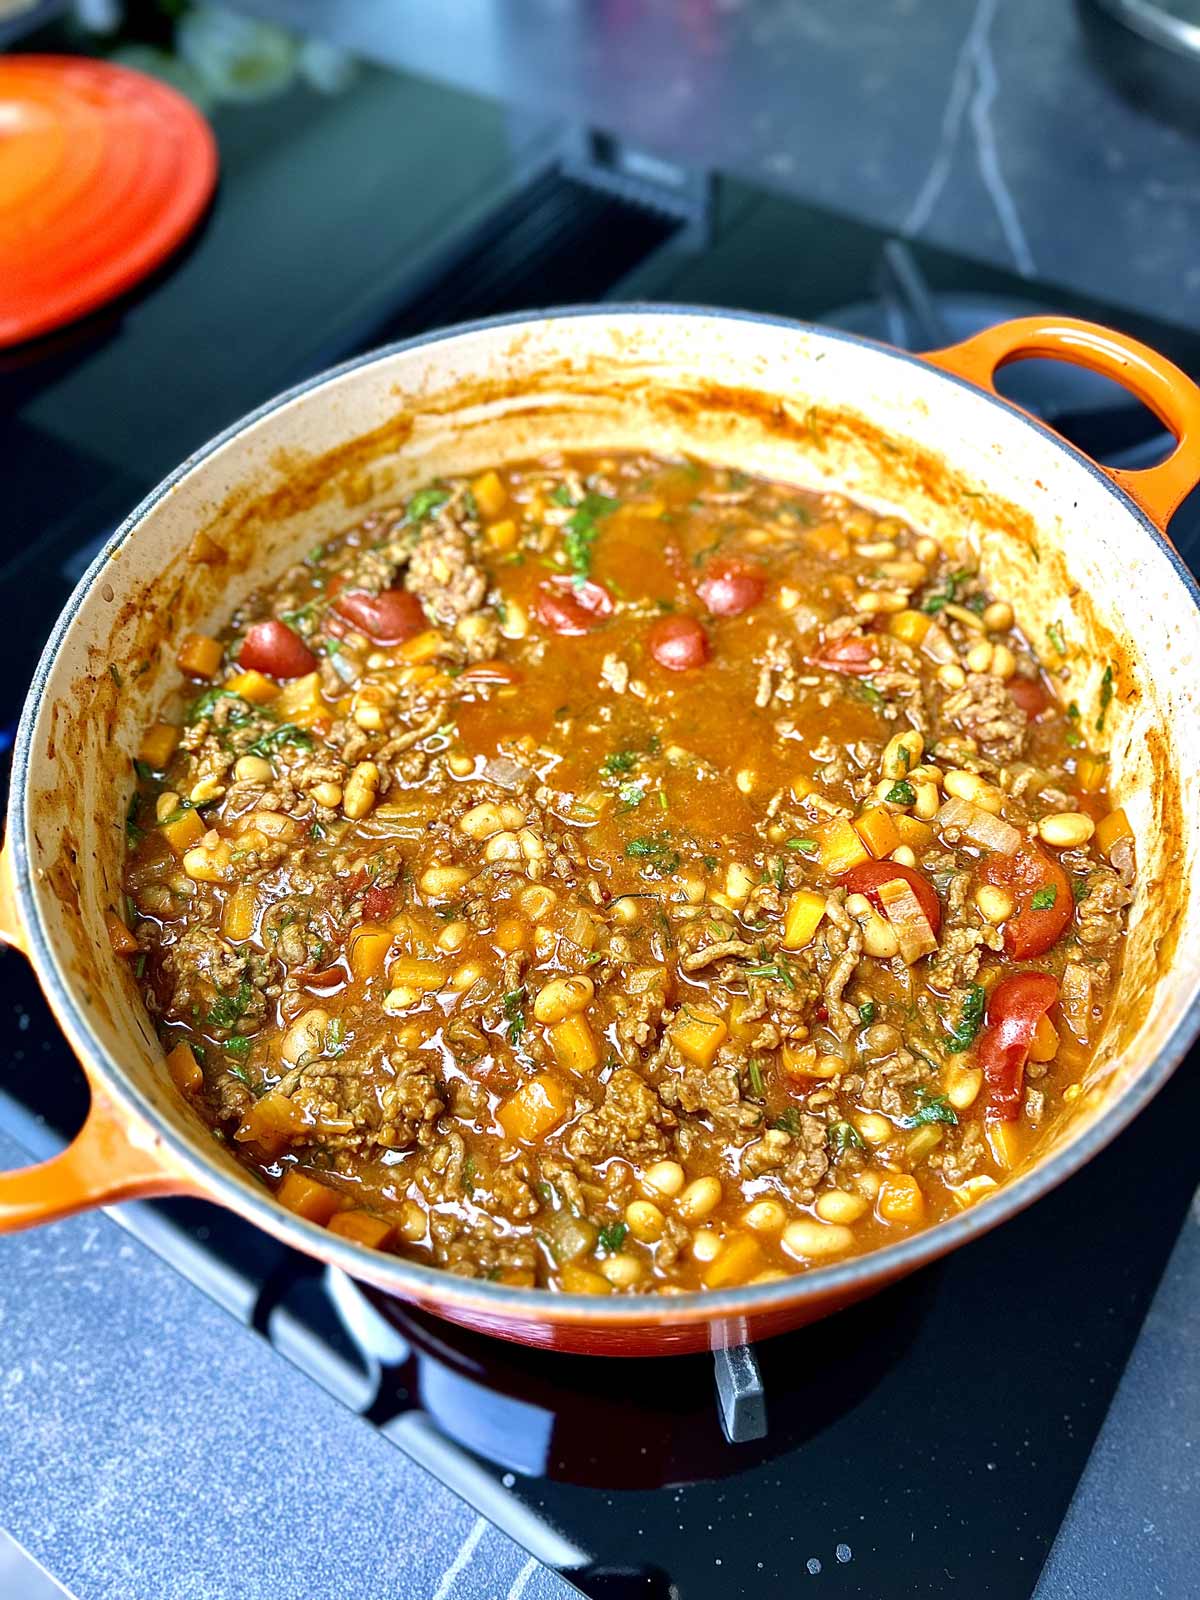 Baked beans with mince beef, reduced and cooked to perfection in a pot, ready to be served.